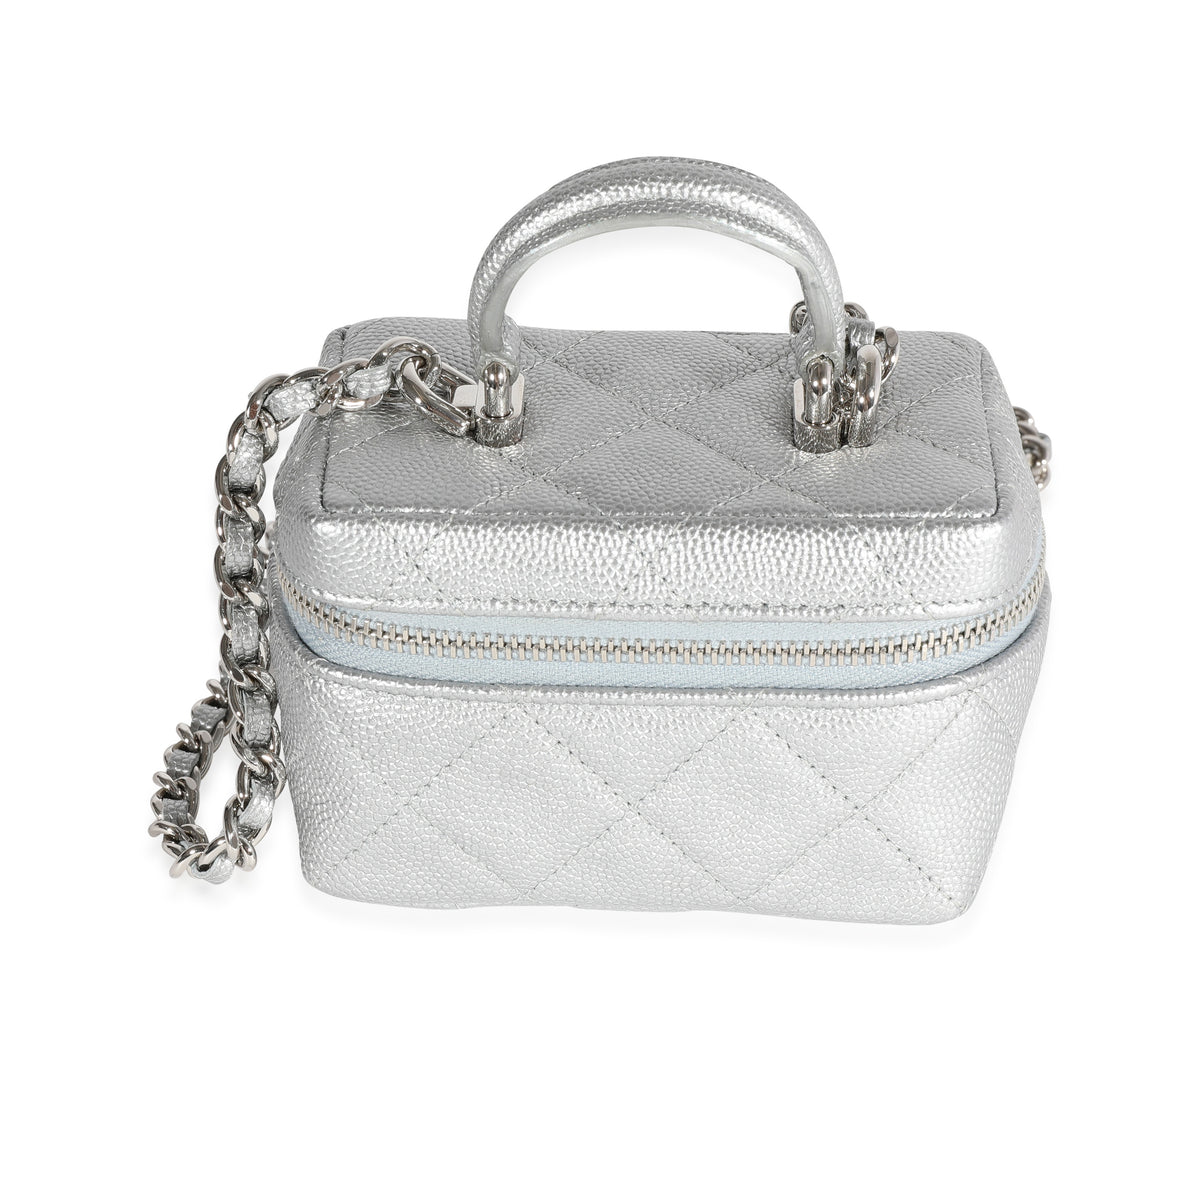 Chanel Silver Metallic Quilted Caviar Mini Vanity Bag With Chain